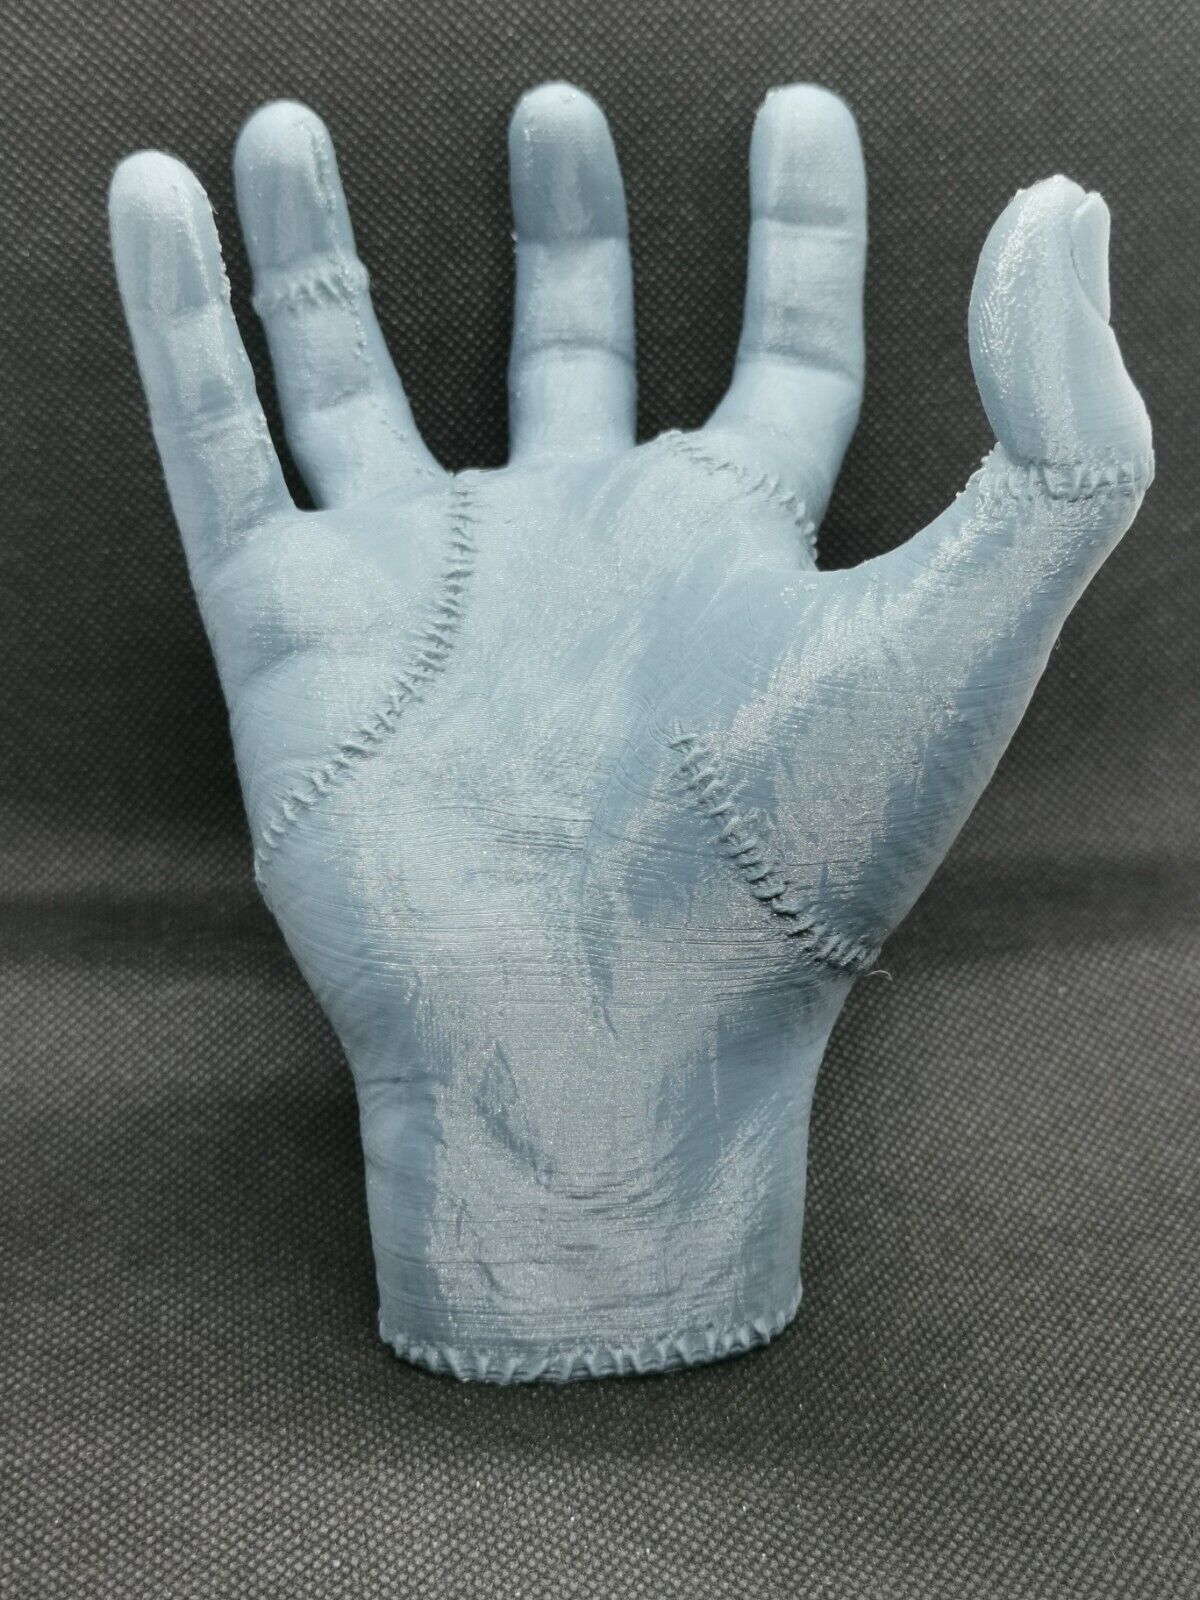 Wednesday "Thing" Hand prop from Addams Family Netflix Series (138mm)